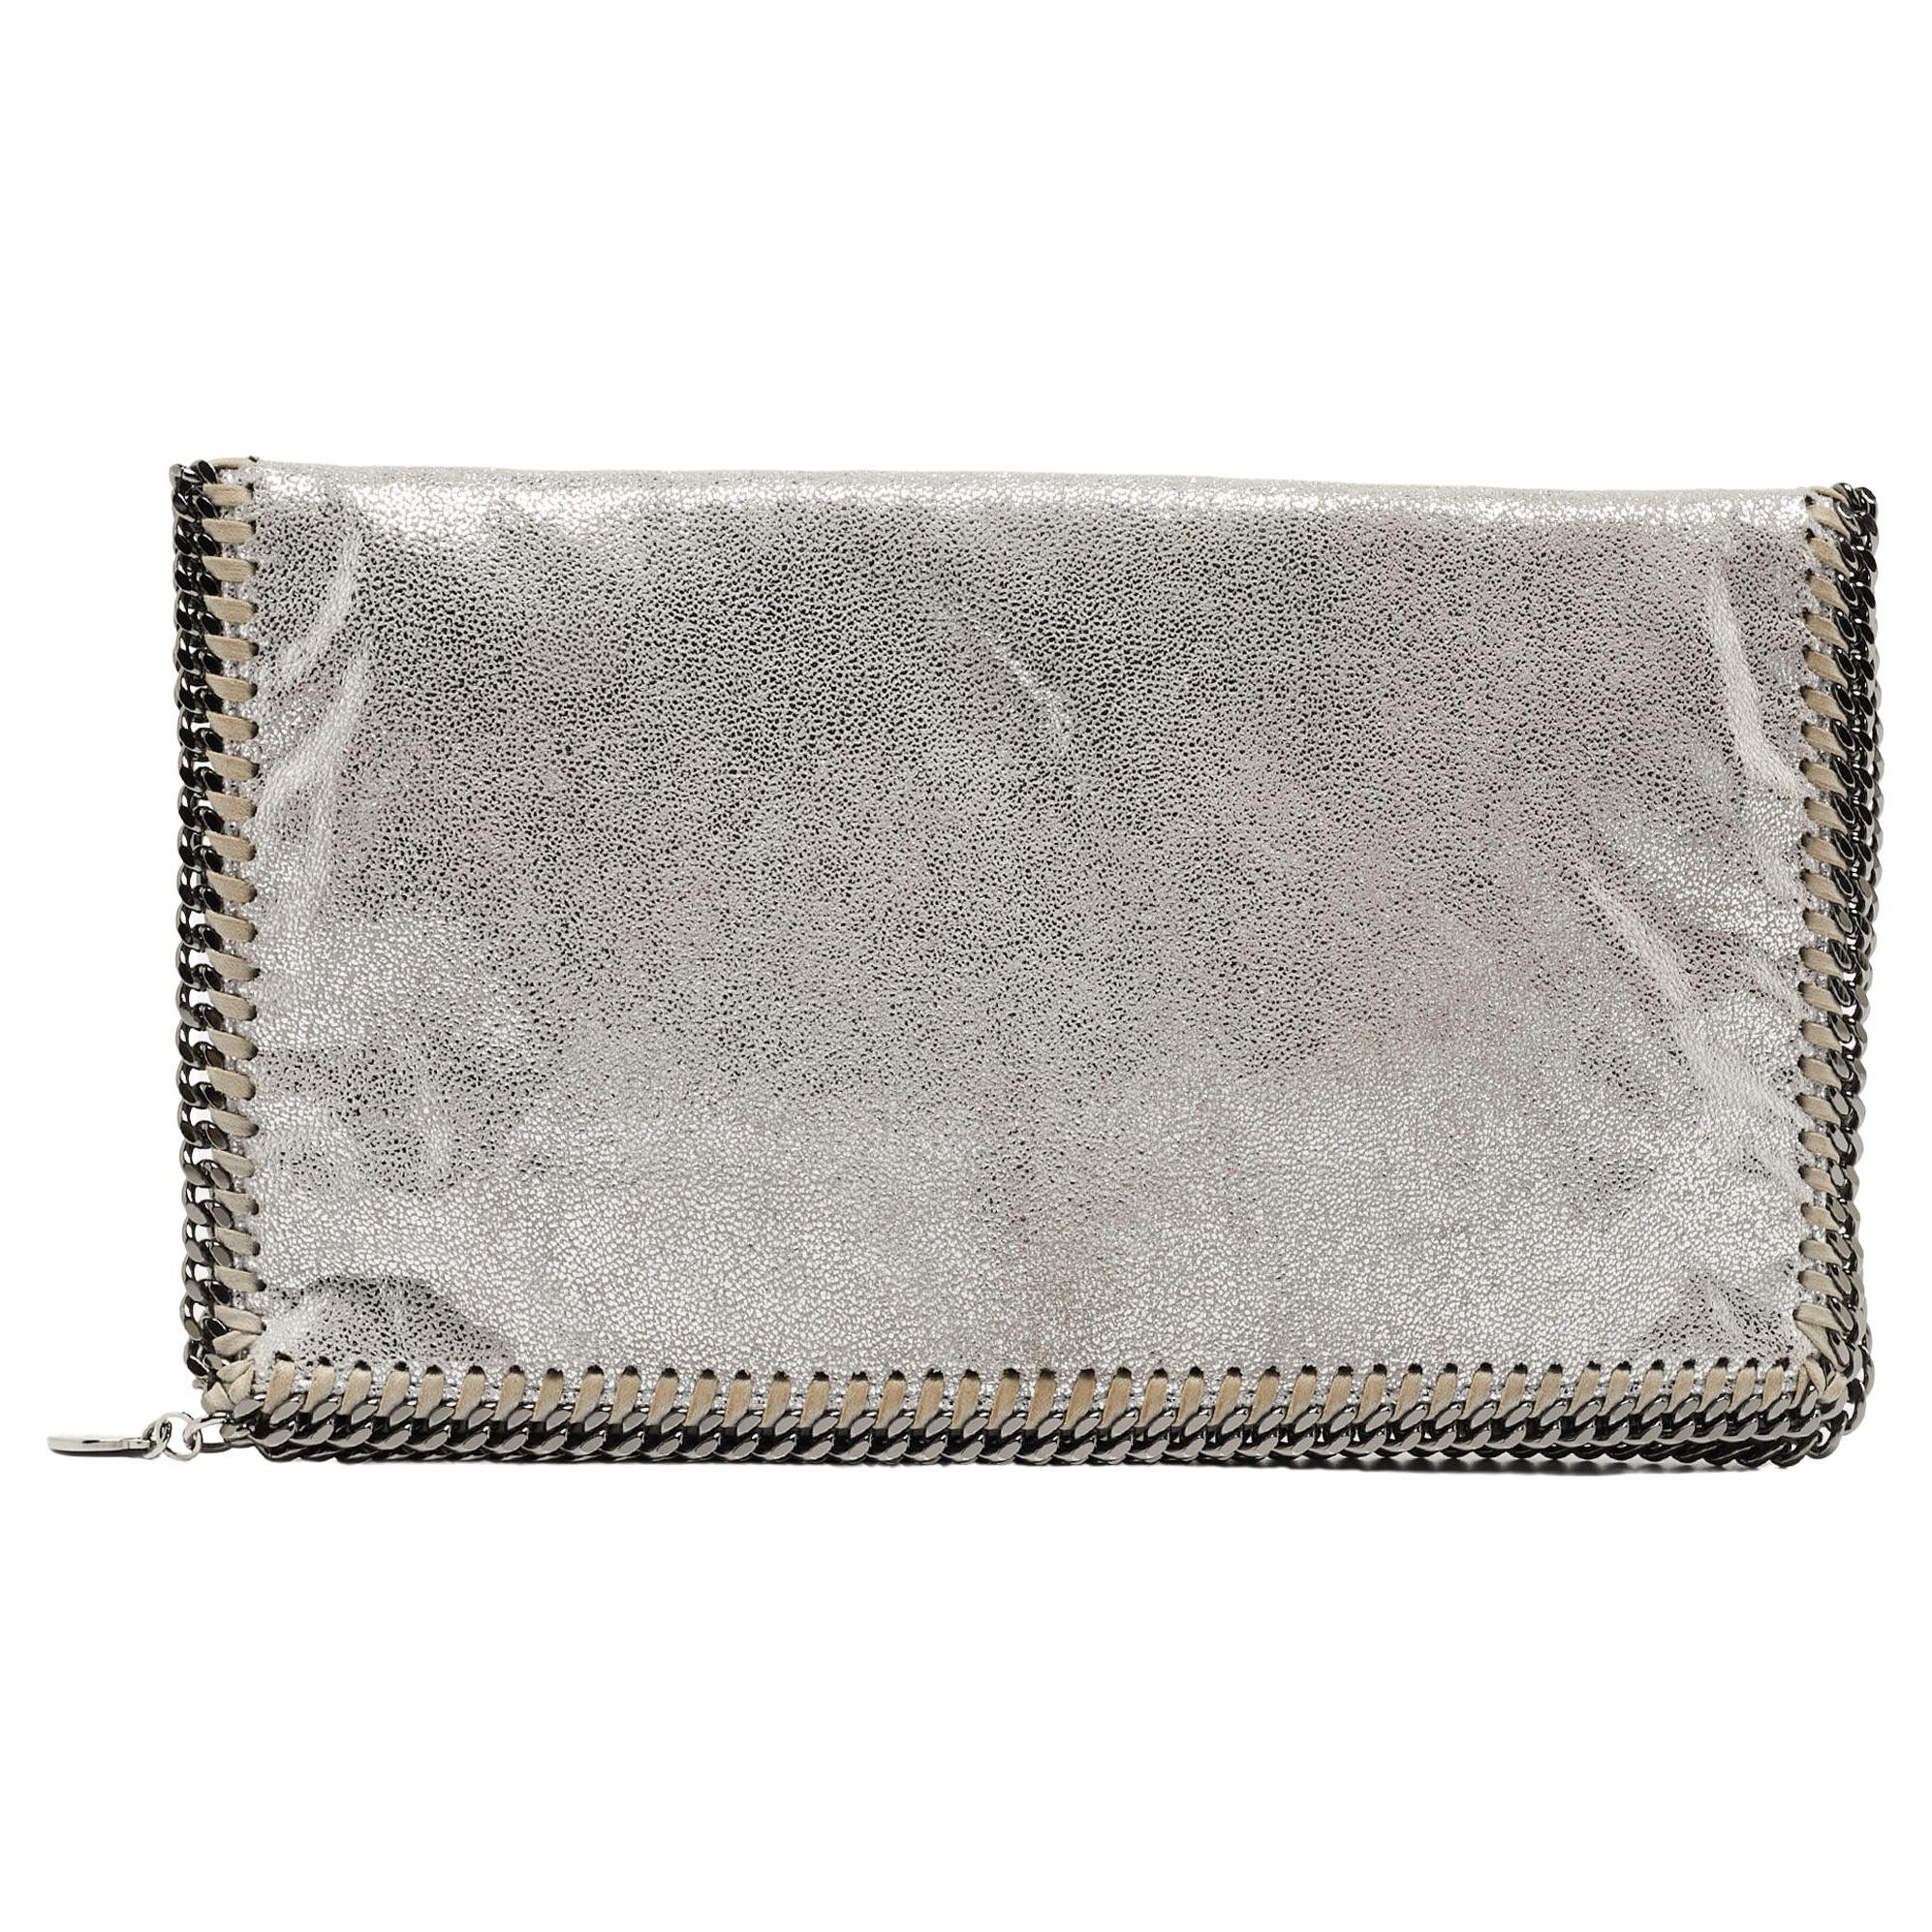 Stella McCartney Silver Faux Leather Falabella Fold-Over Clutch For Sale